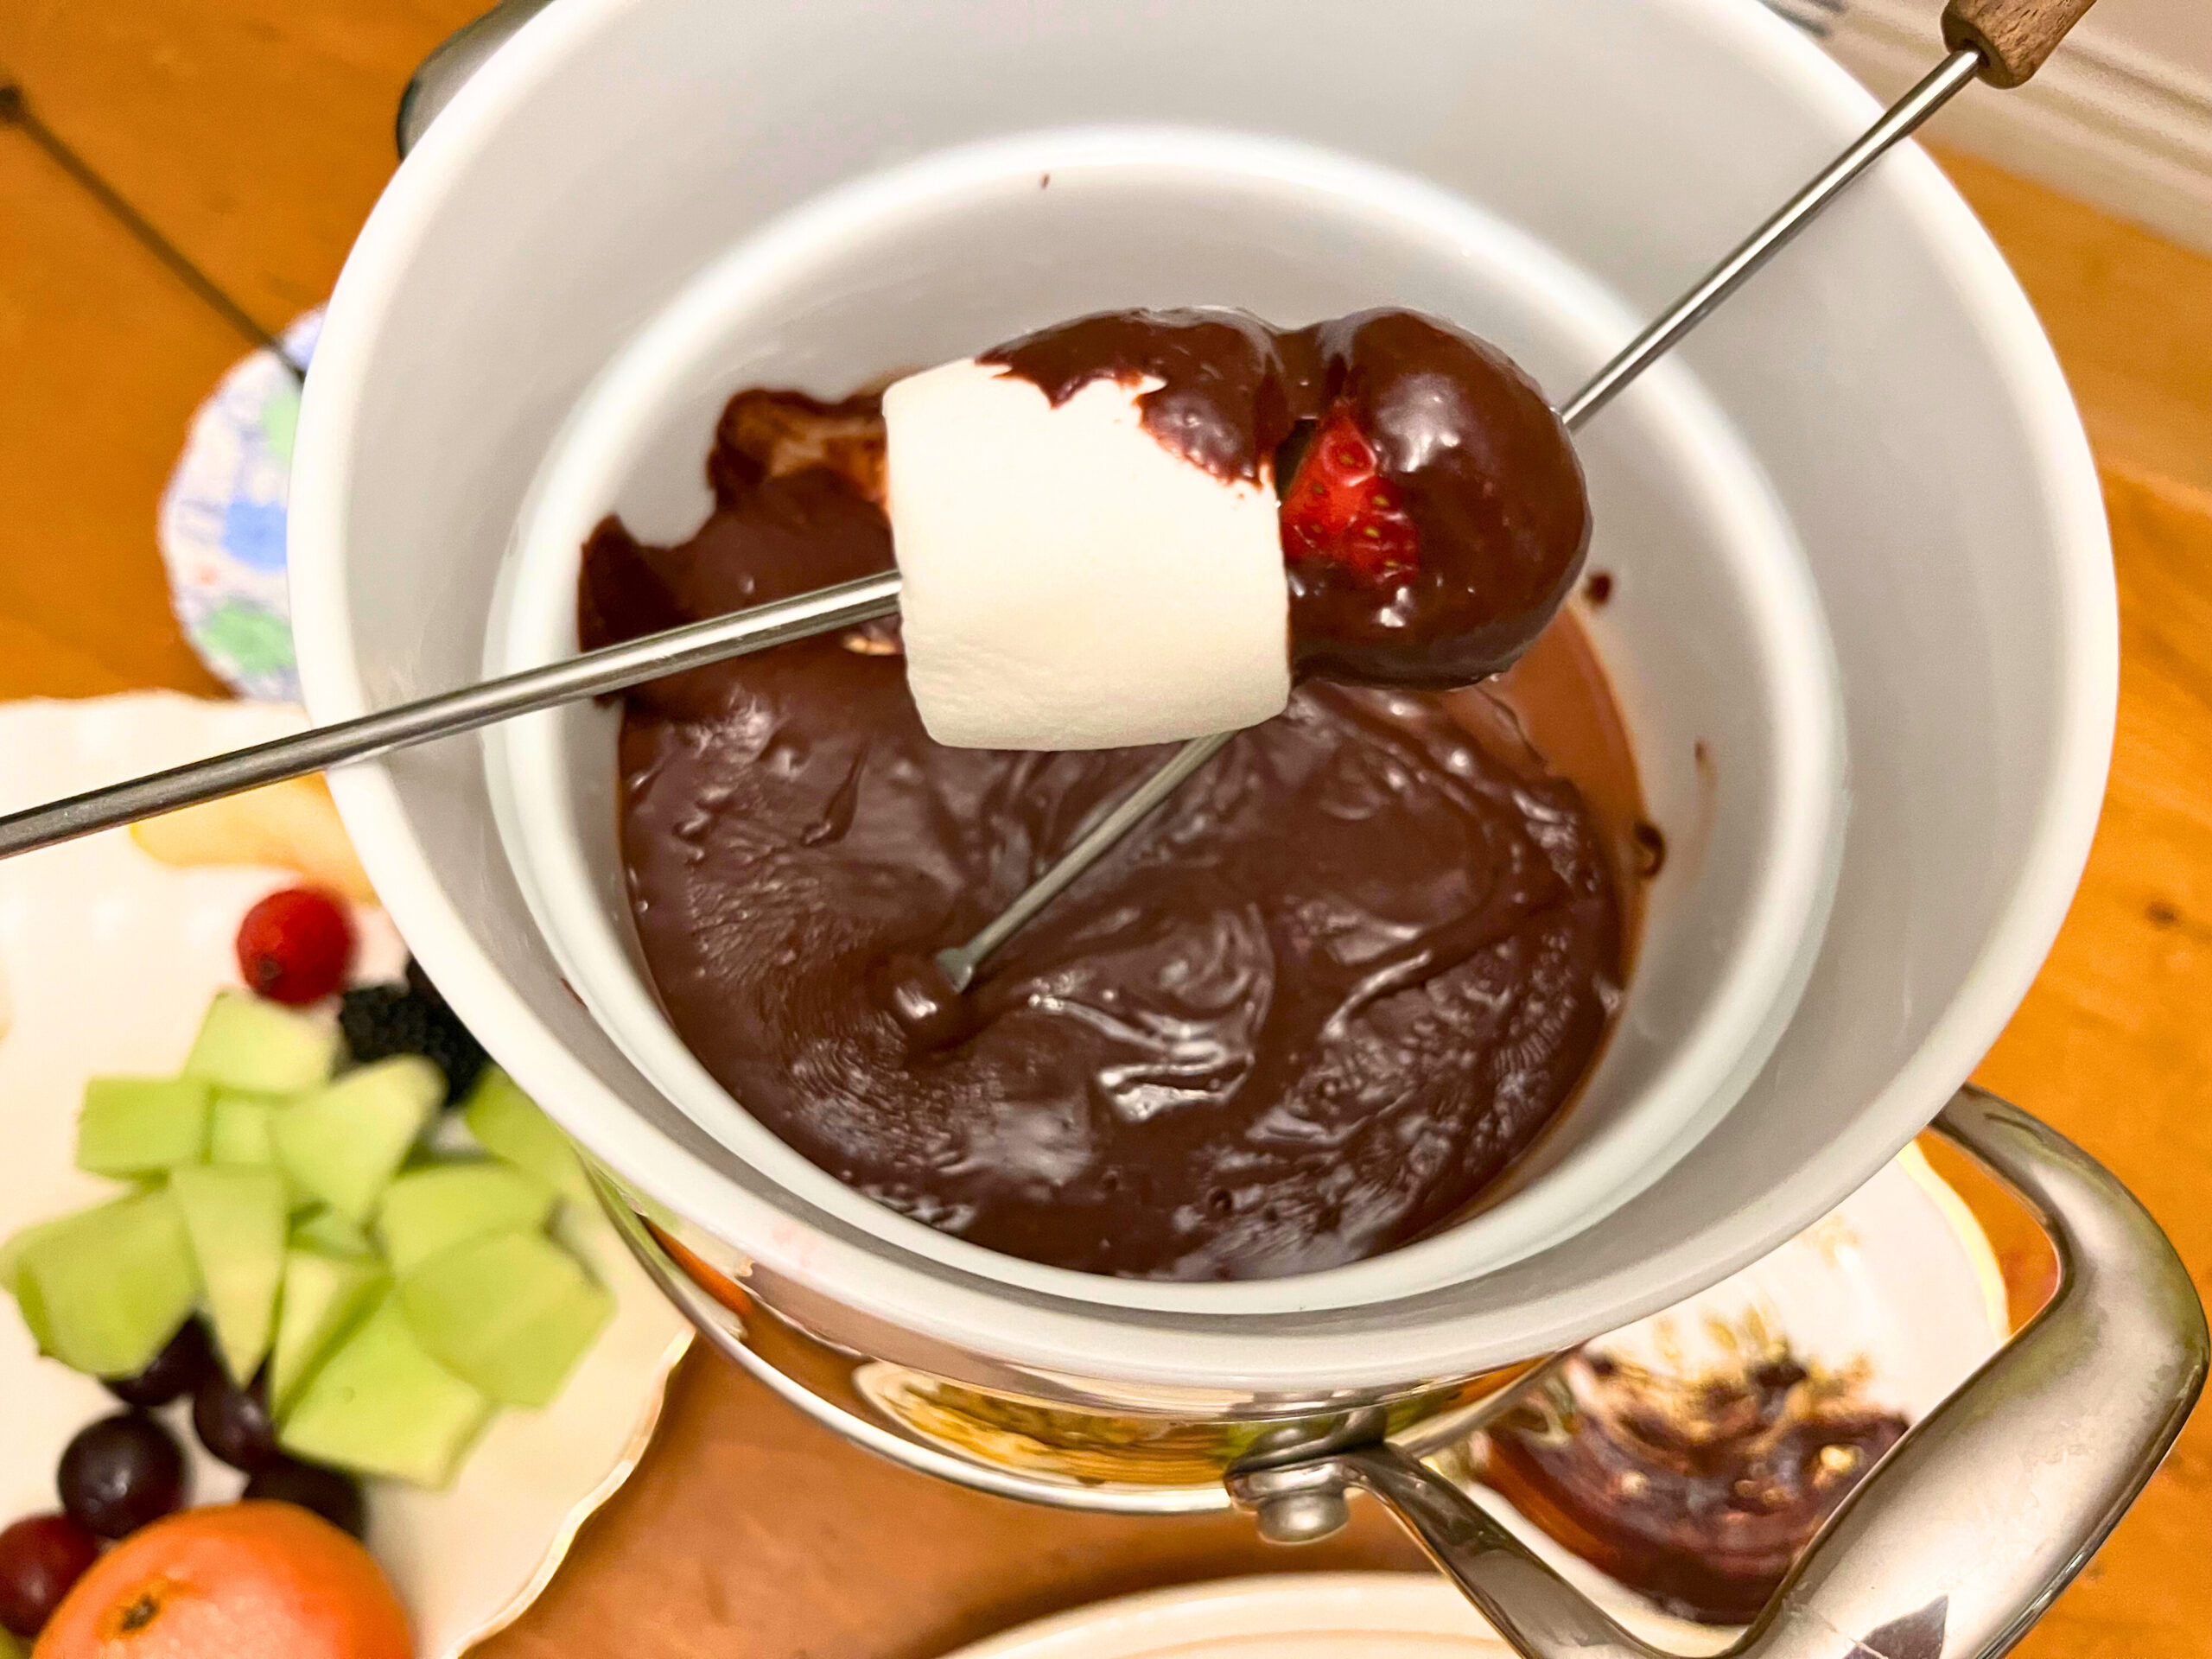 Someone dipping marshmallow and strawberry into a chocolate fondue.